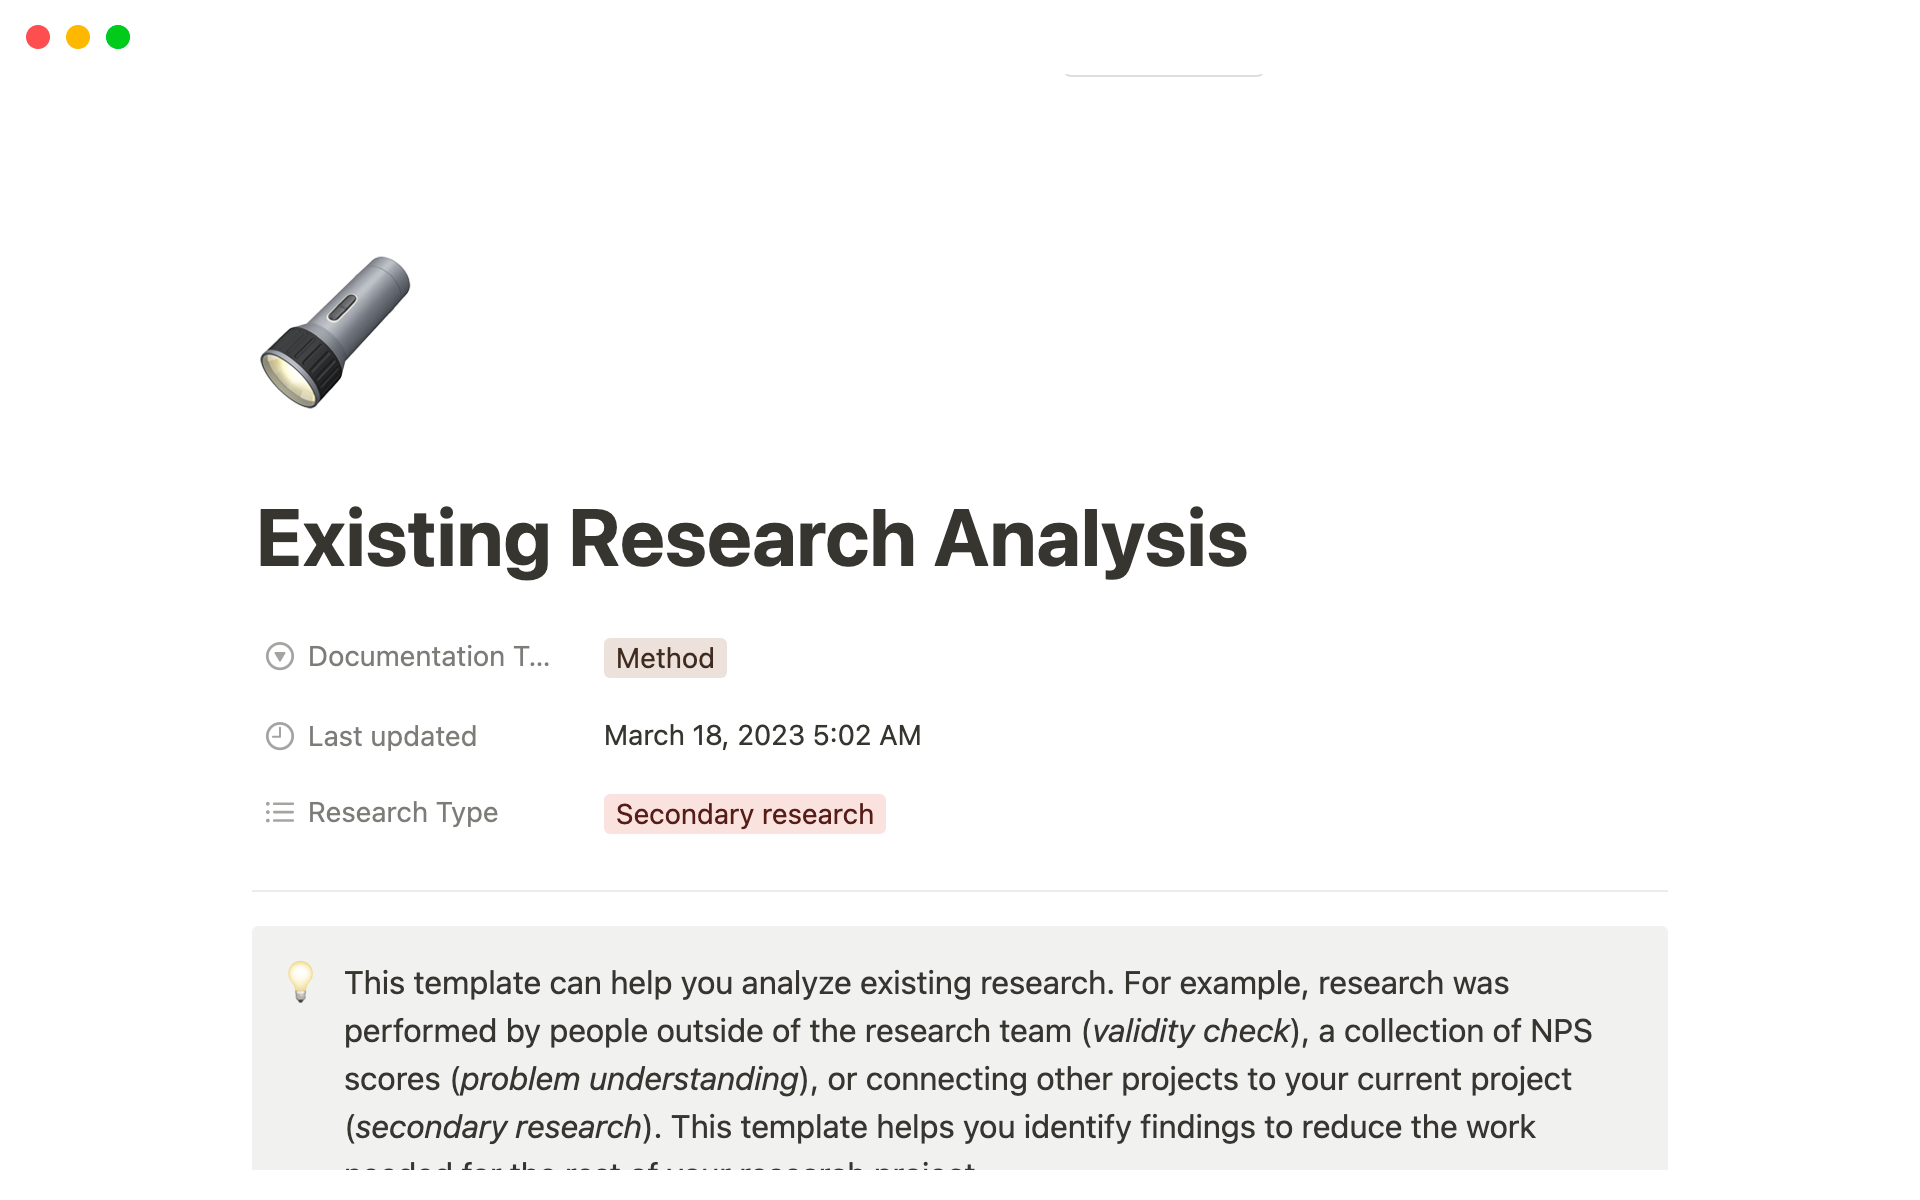 This template helps UX Researchers identify findings to reduce the work needed for the rest of your research project